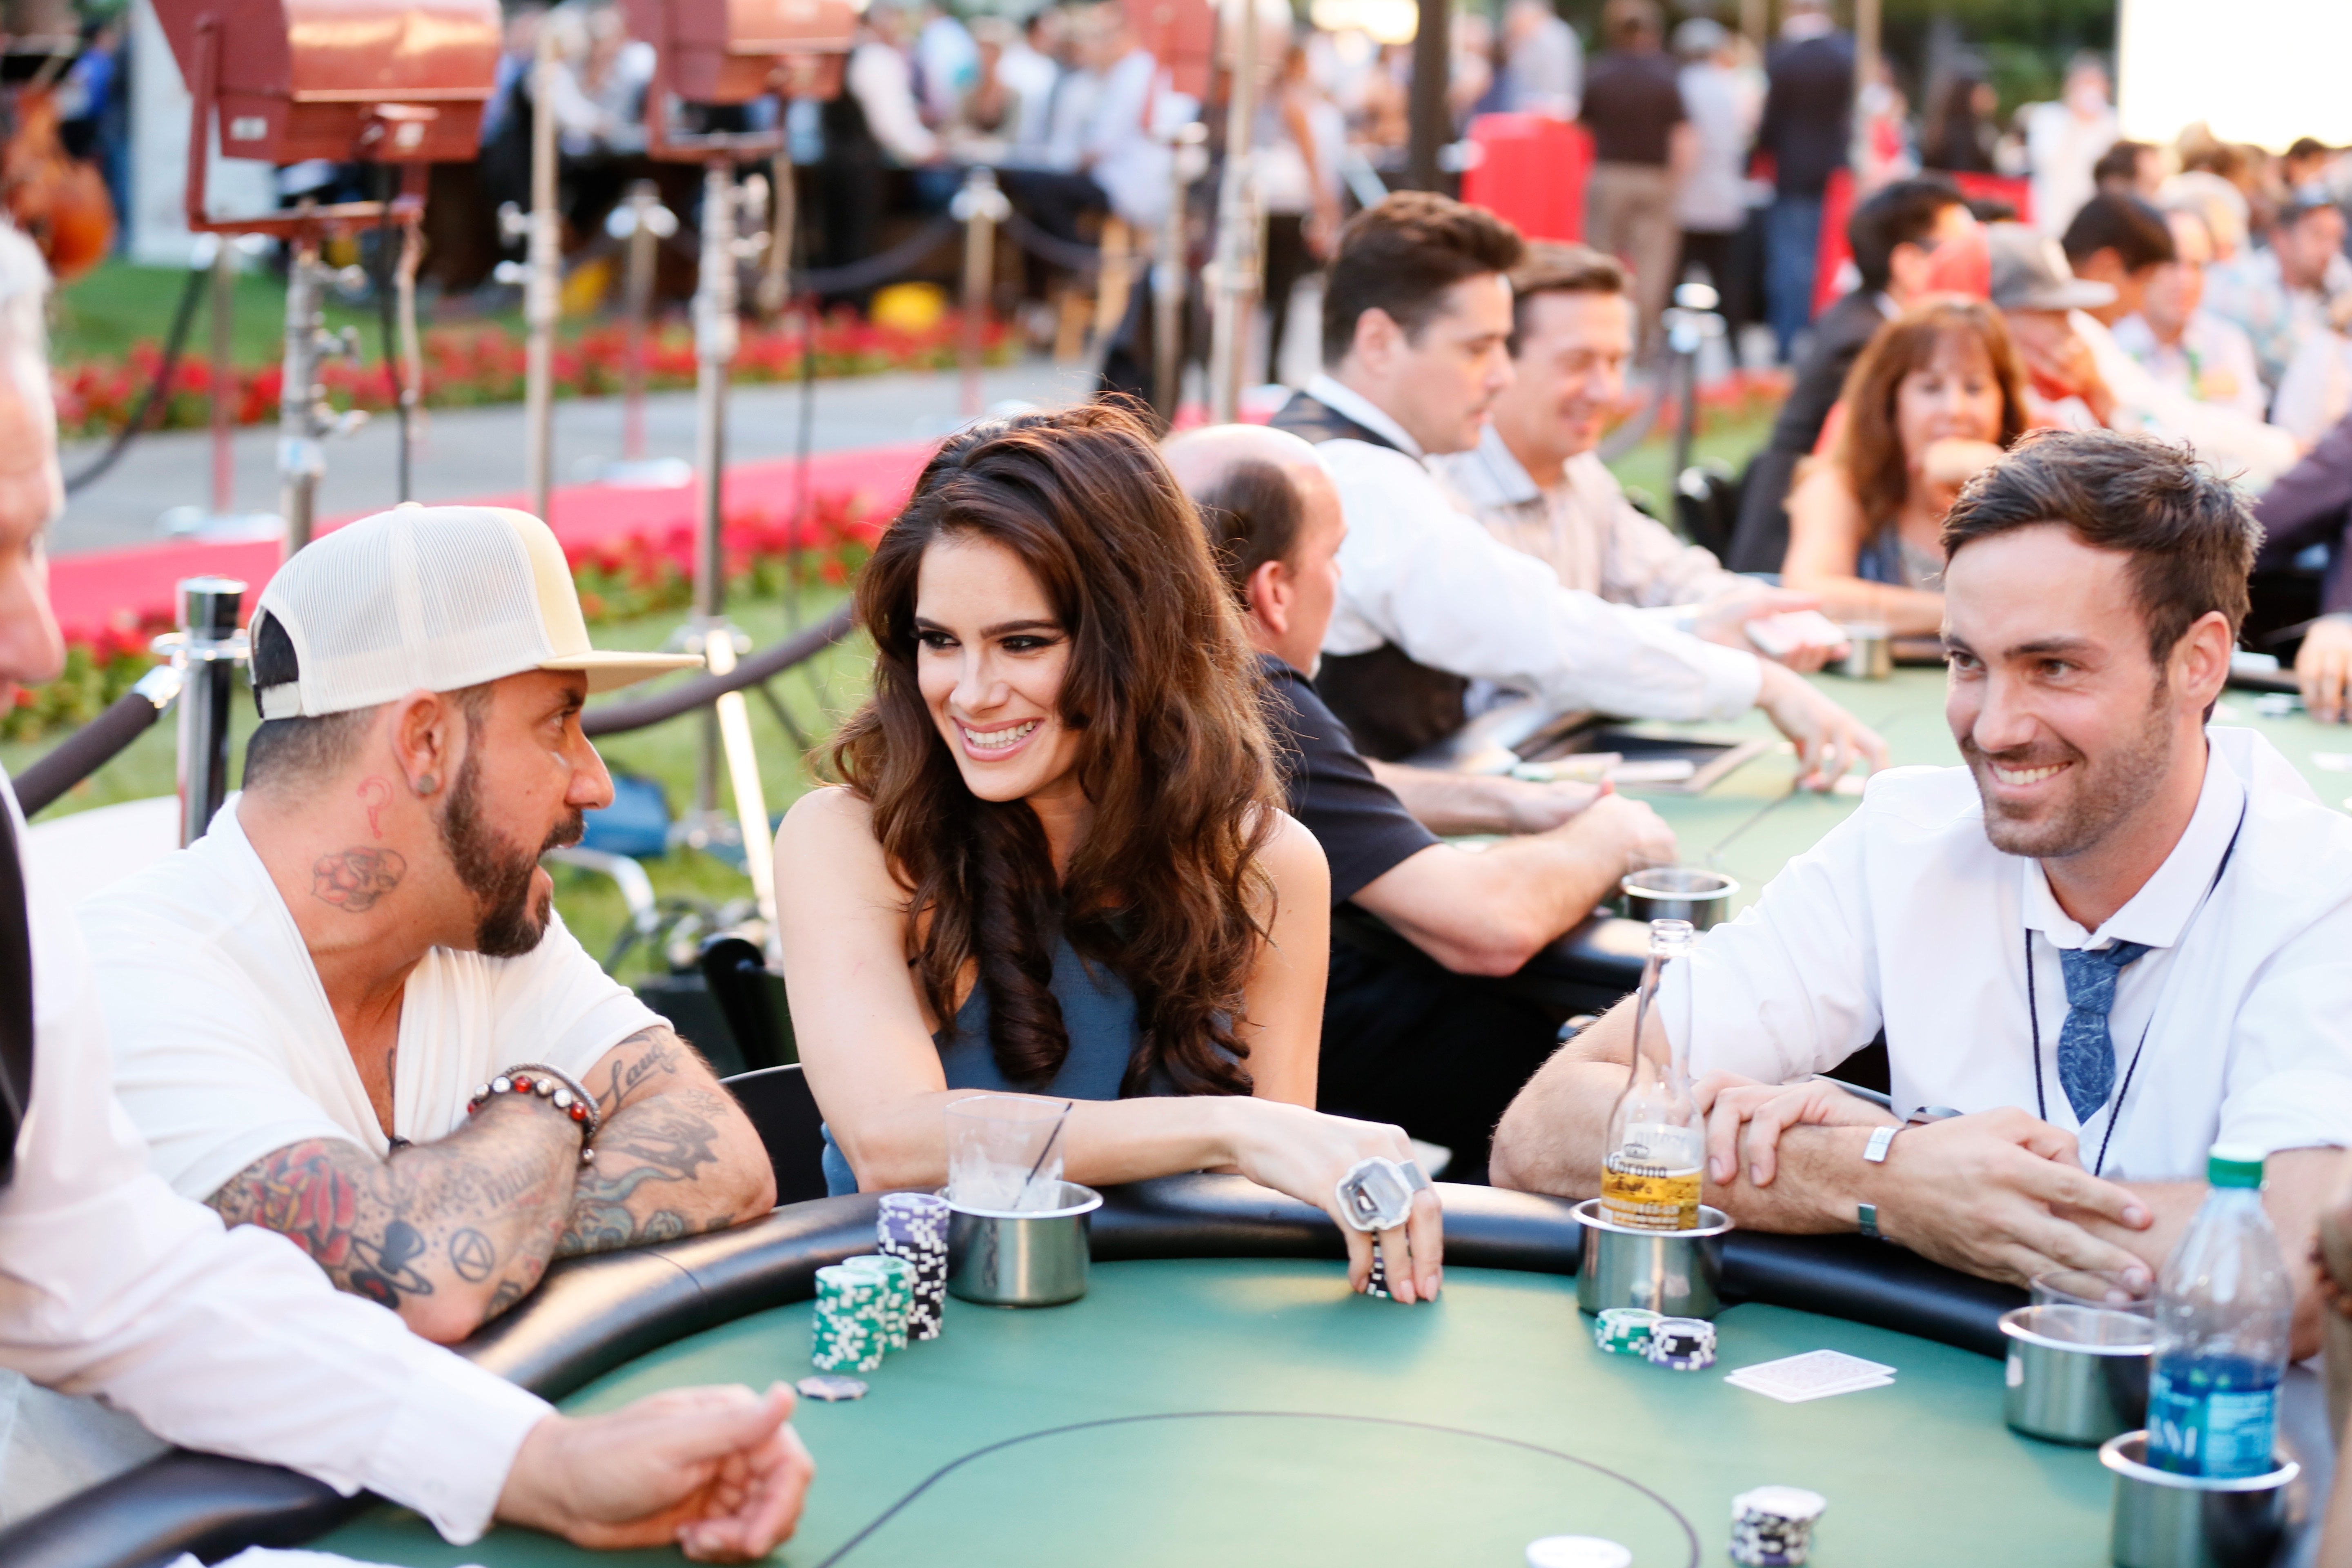 Actress and Poker Star Tiffany Michelle with A.J. McLean and Jeff Dye at the 5th Annual Variety poker tournament benefiting The Children's Charity Of SoCal at Paramount Studios on July 22, 2015 in Hollywood, California.